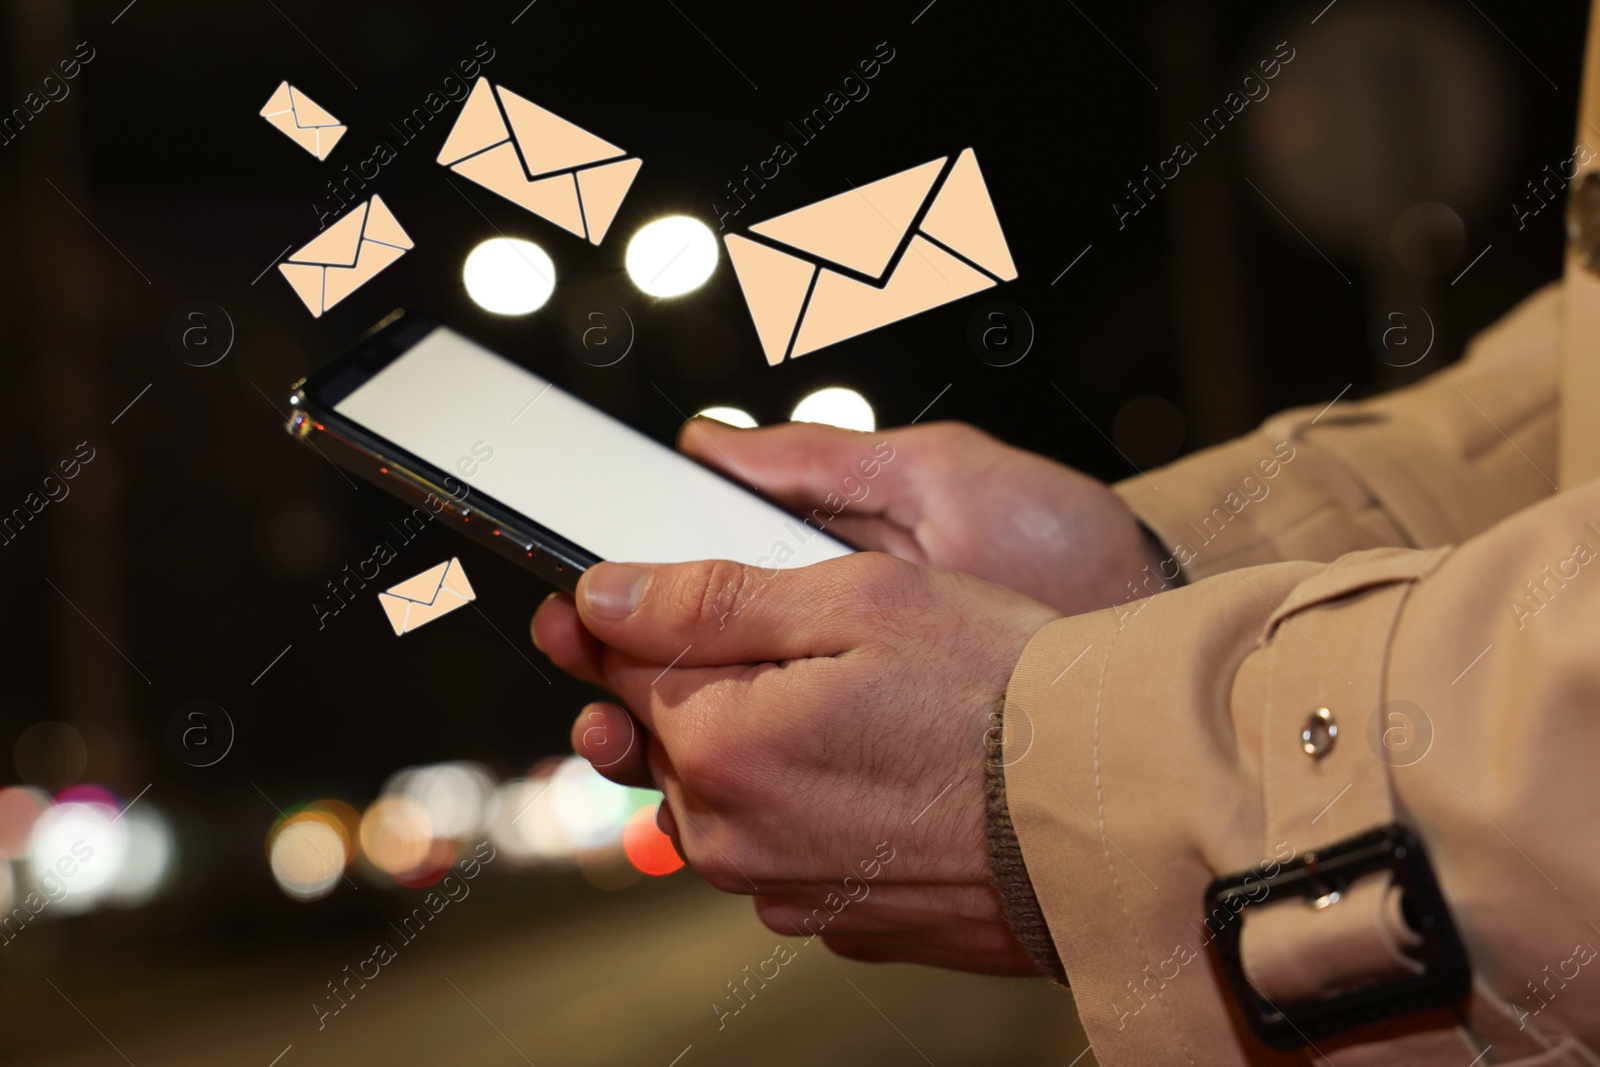 Image of Man with smartphone chatting outdoors, closeup. Many illustrations of envelope as incoming messages around device